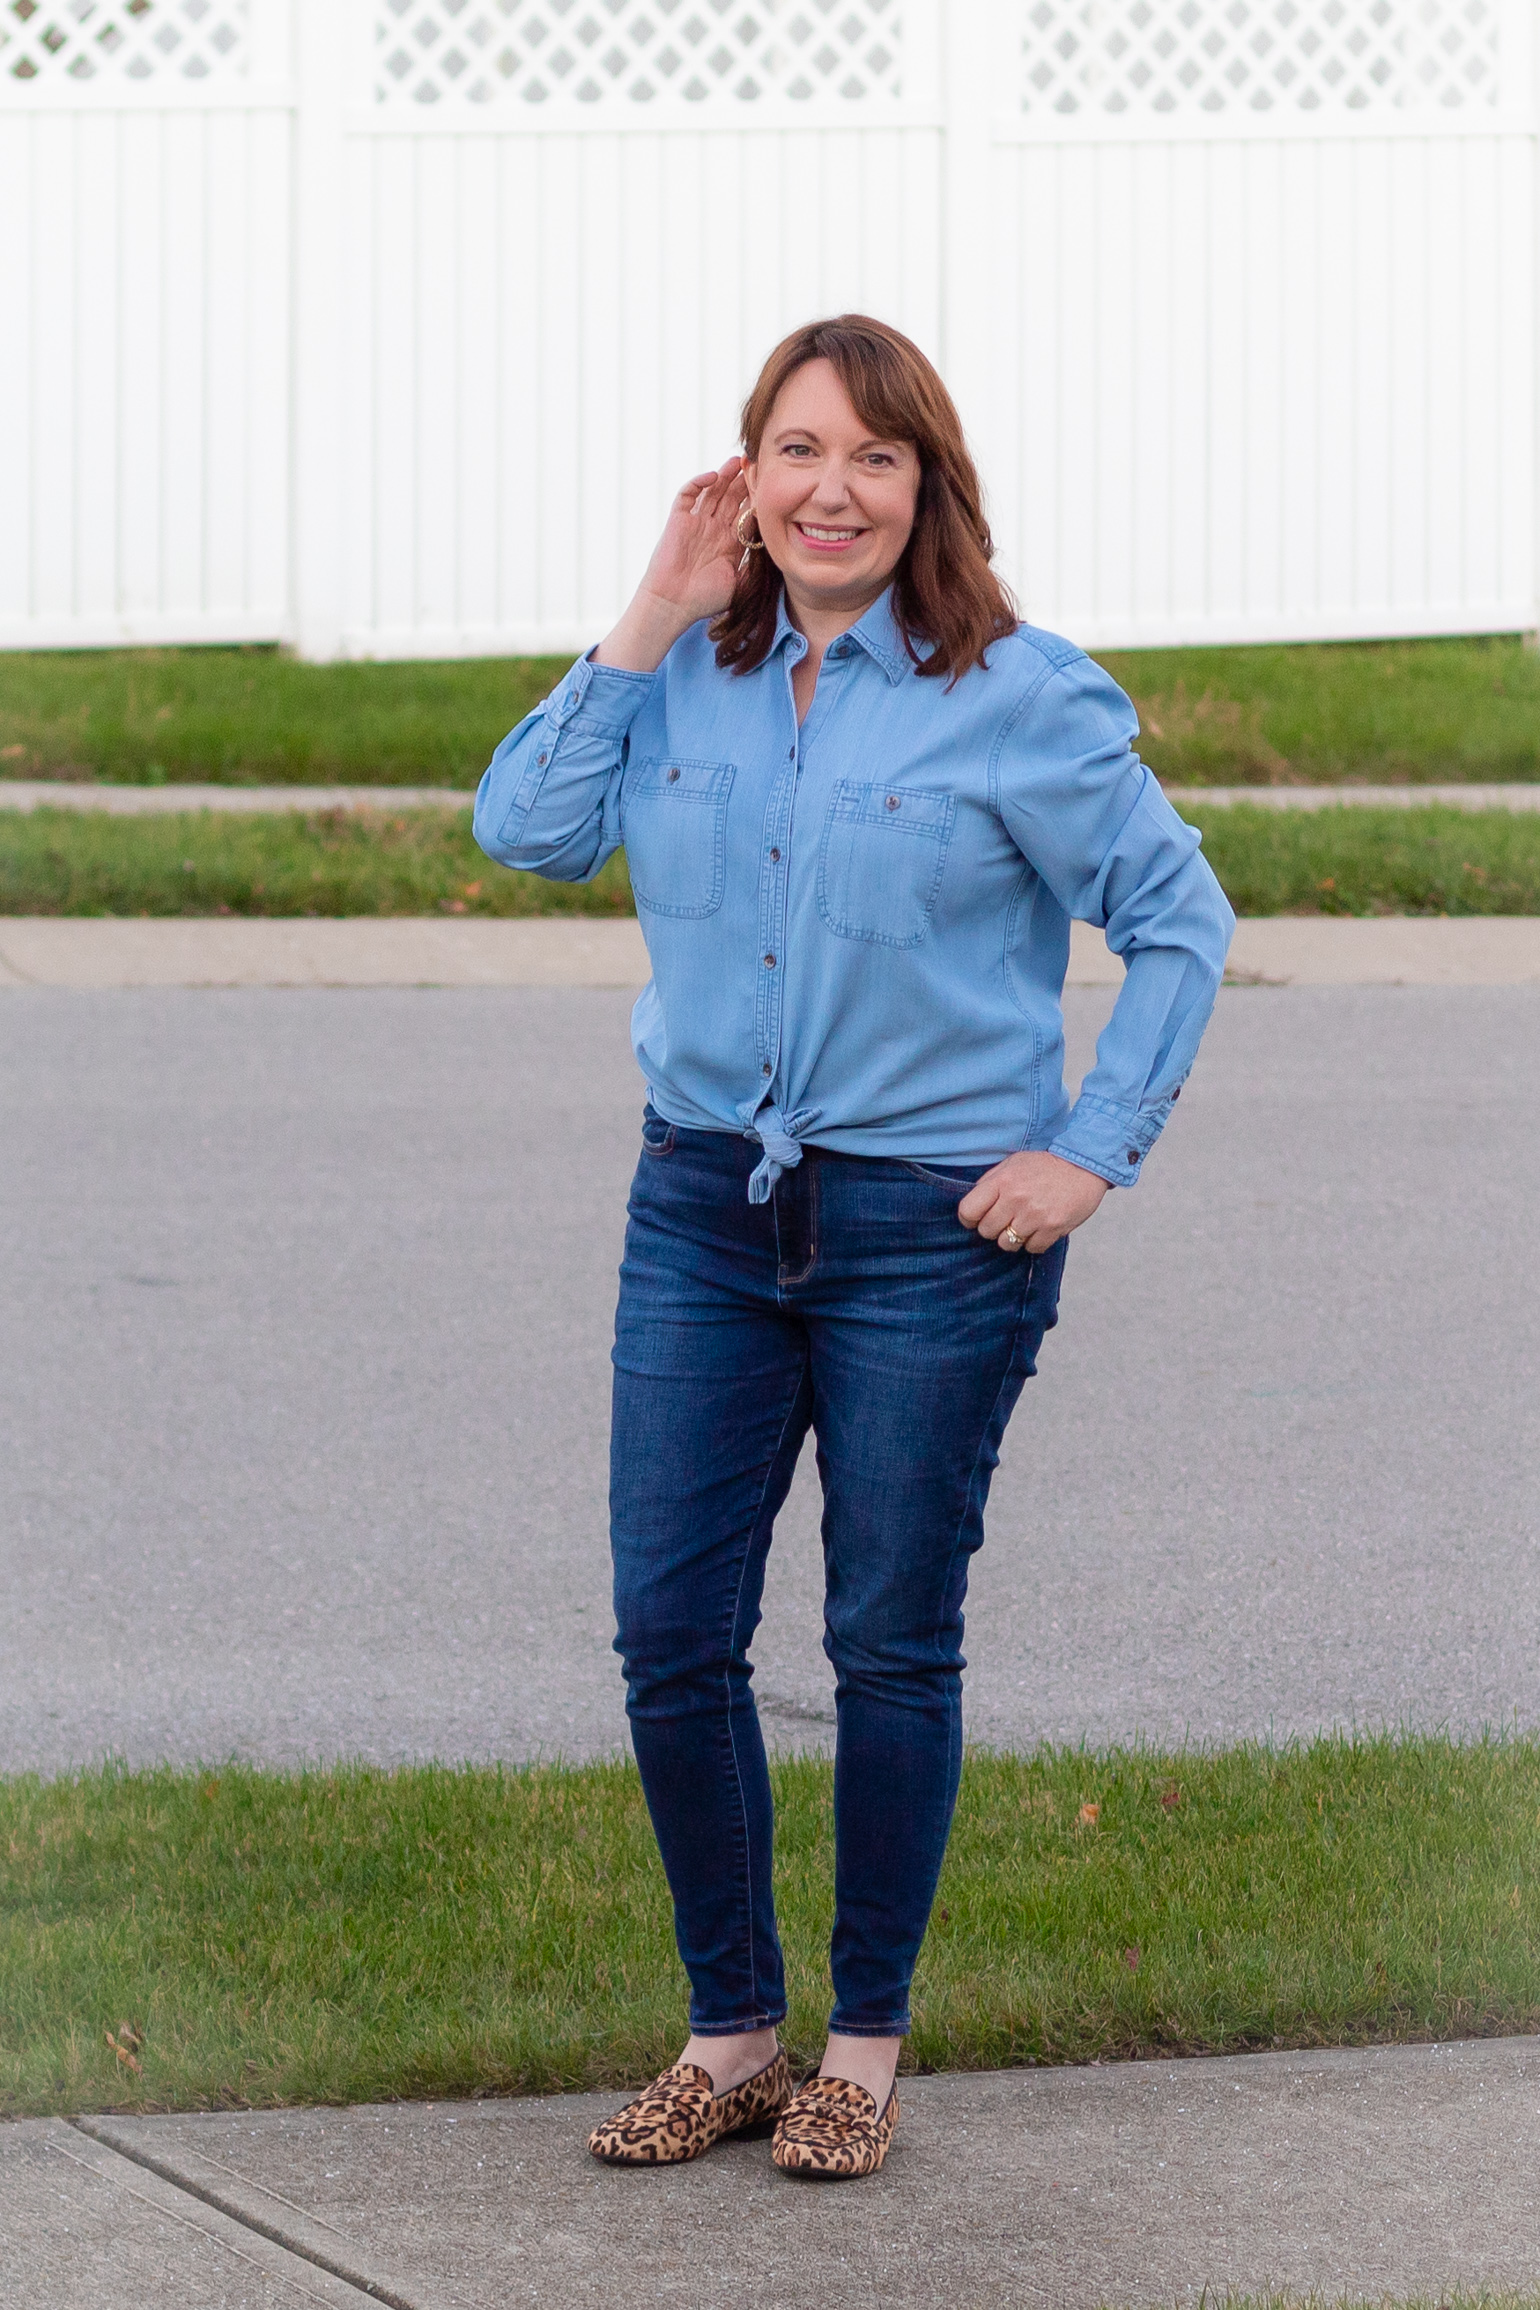 How to Look Chic in Denim on Denim